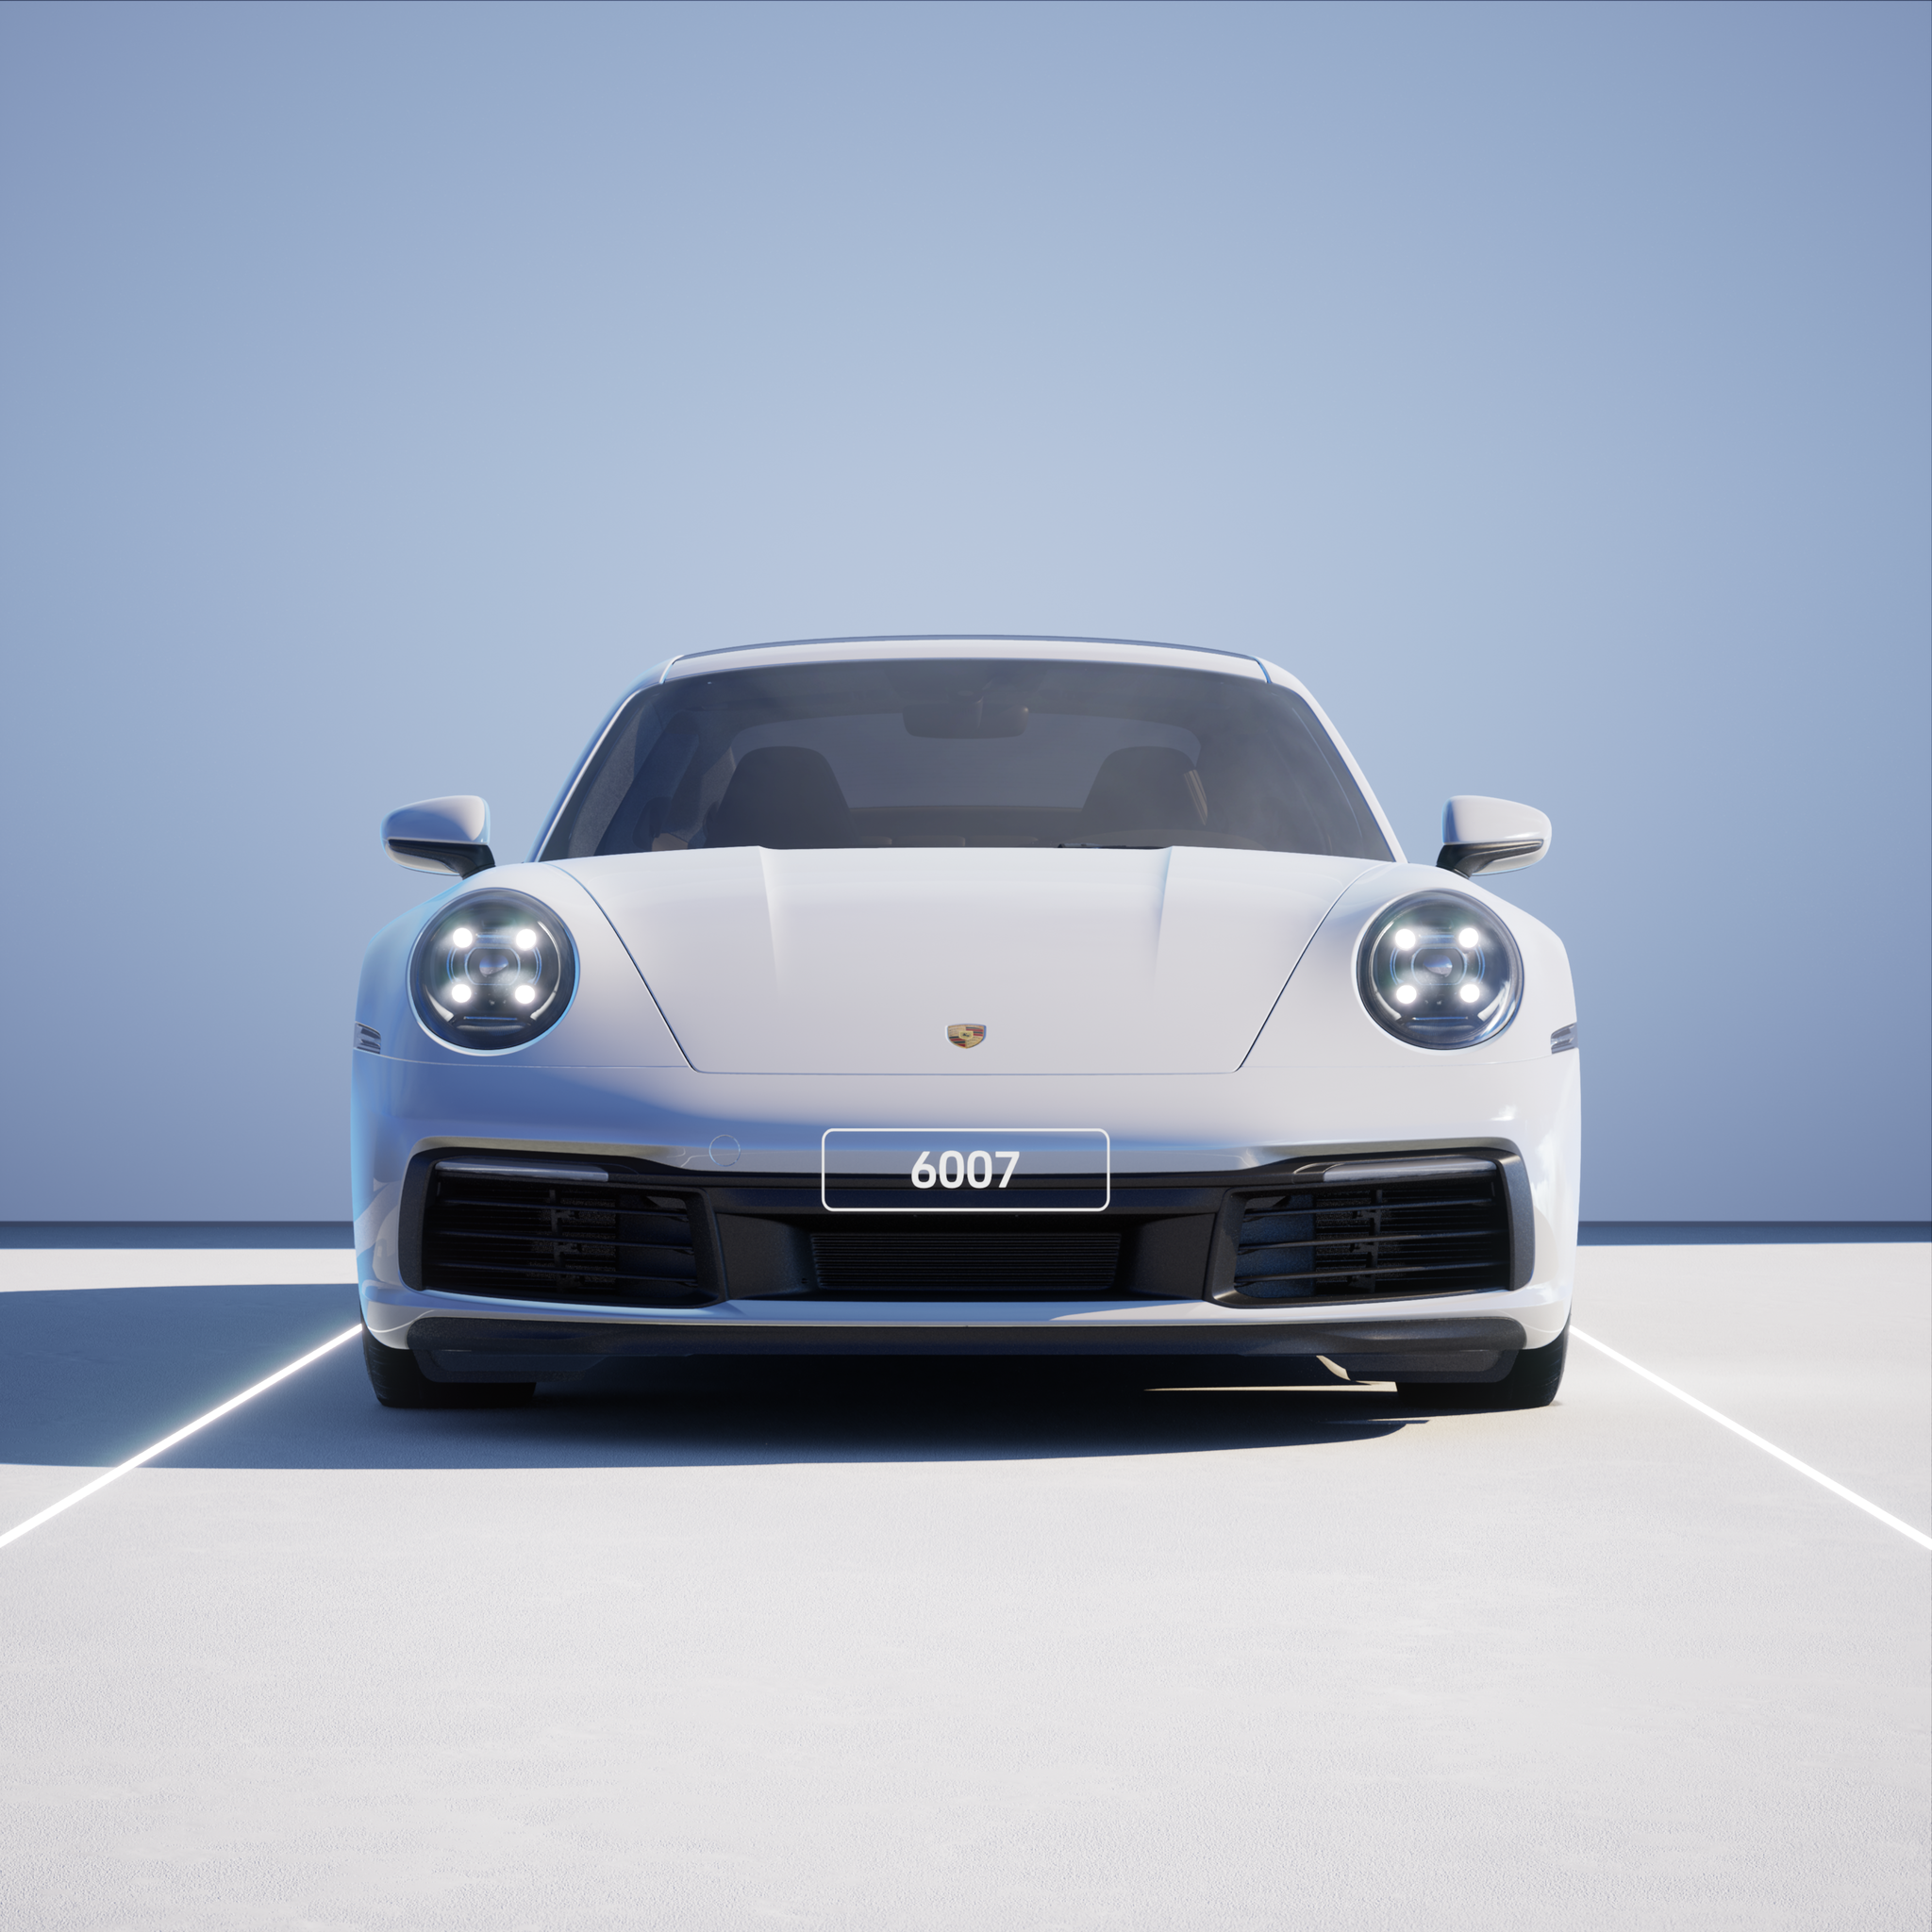 The PORSCHΞ 911 6007 image in phase